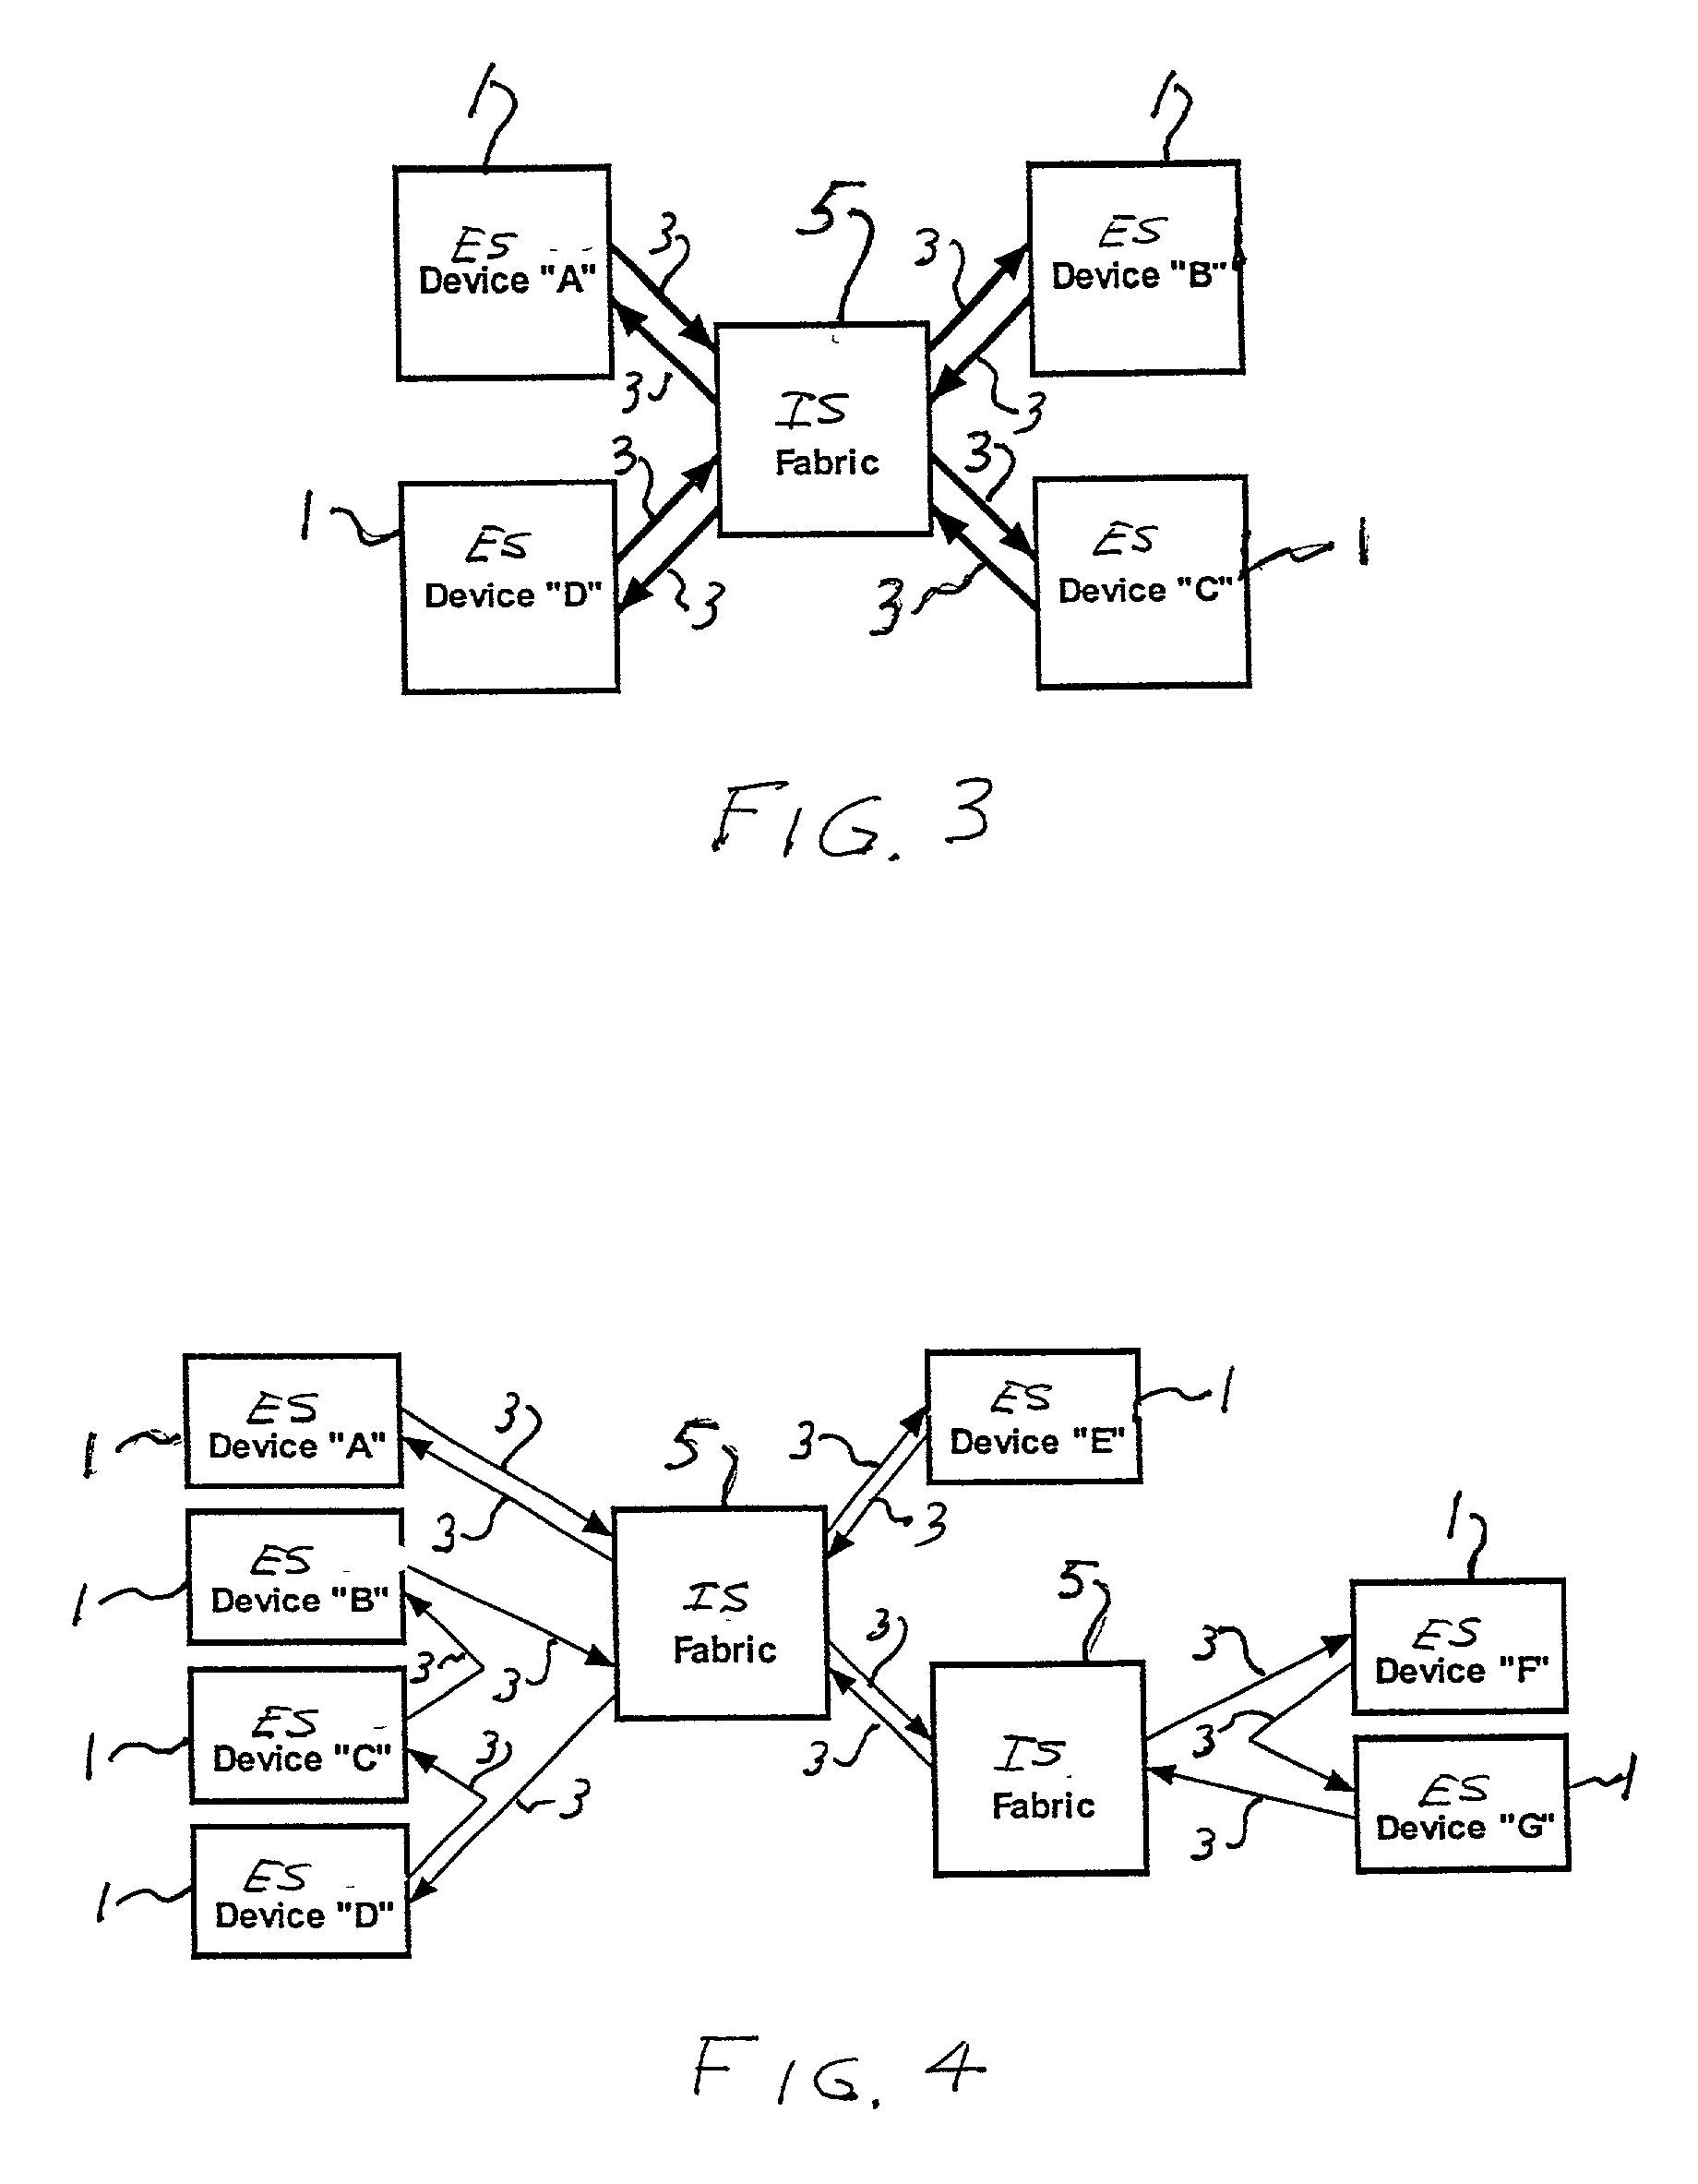 Communication method for packet switching systems